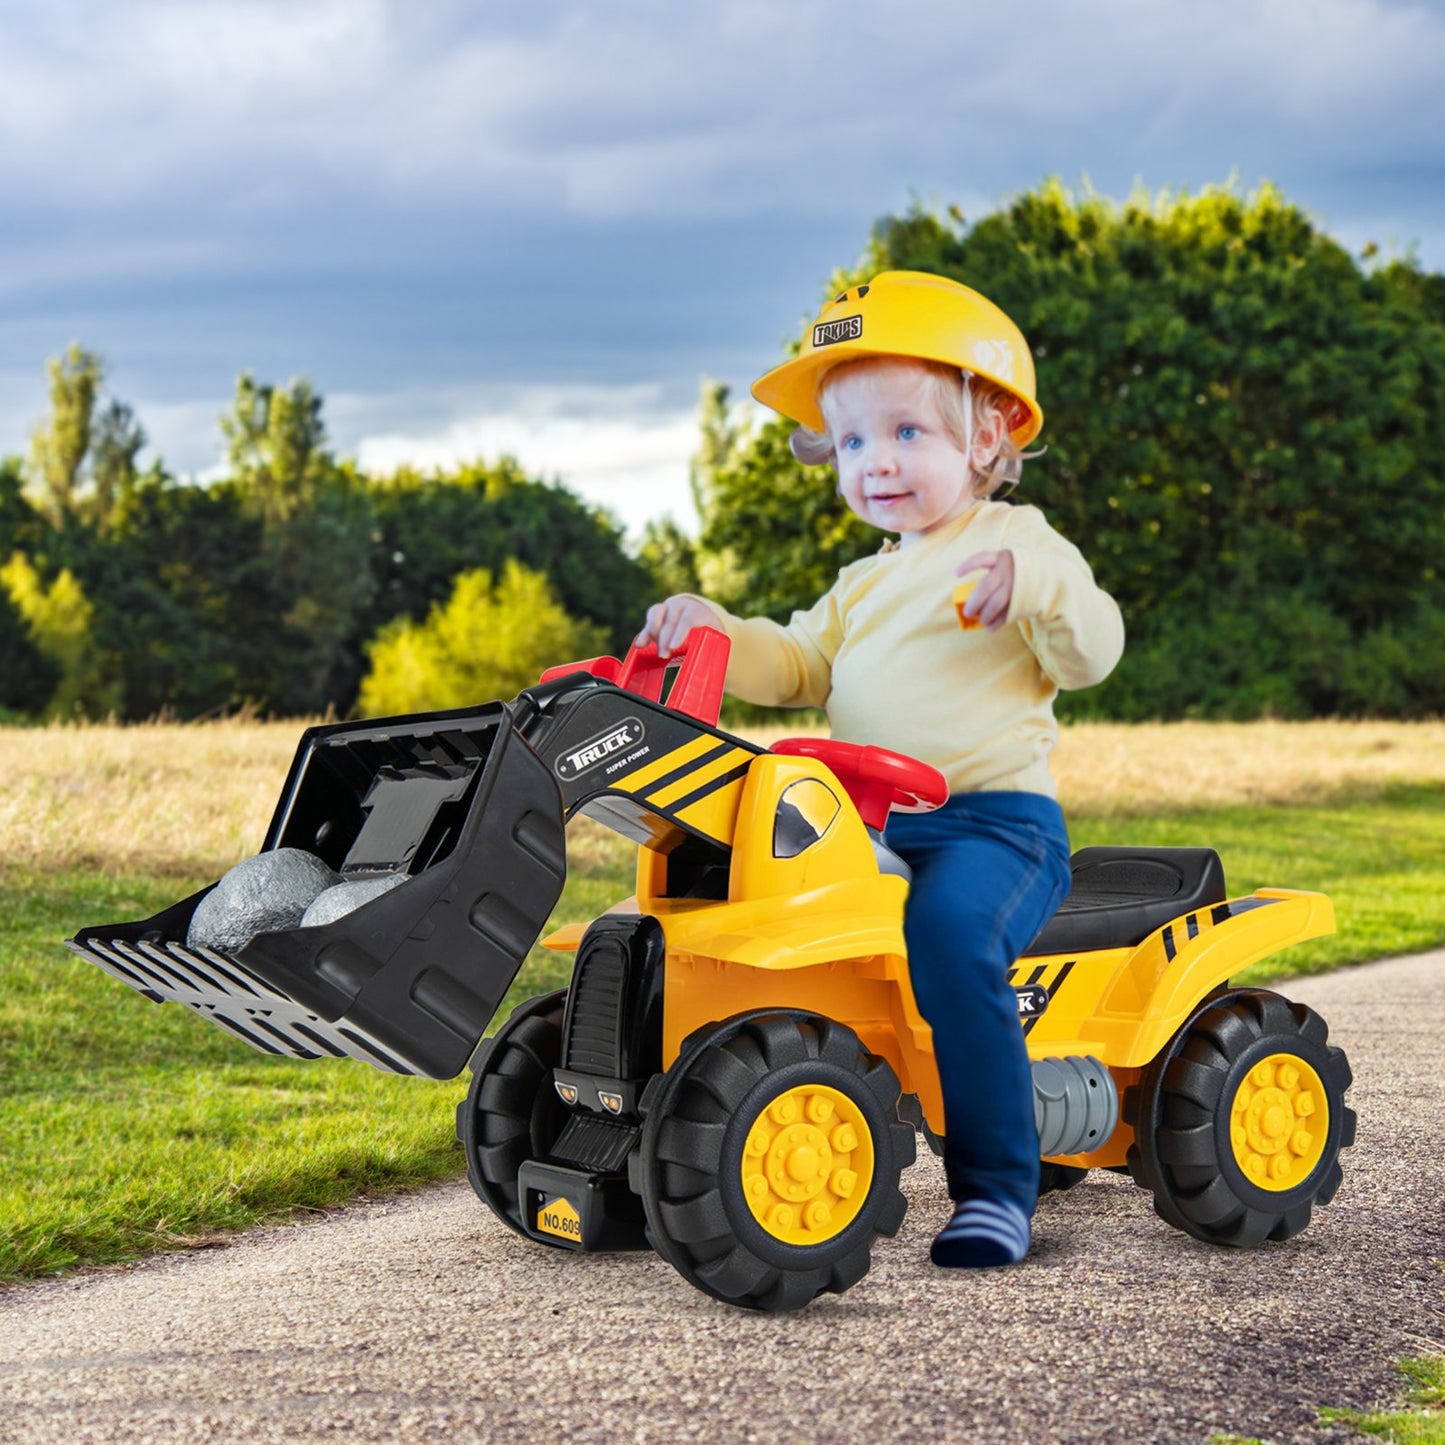 6V Electric Kids Ride On Bulldozer Pretend Play Truck Toy with Adjustable Bucket, Yellow